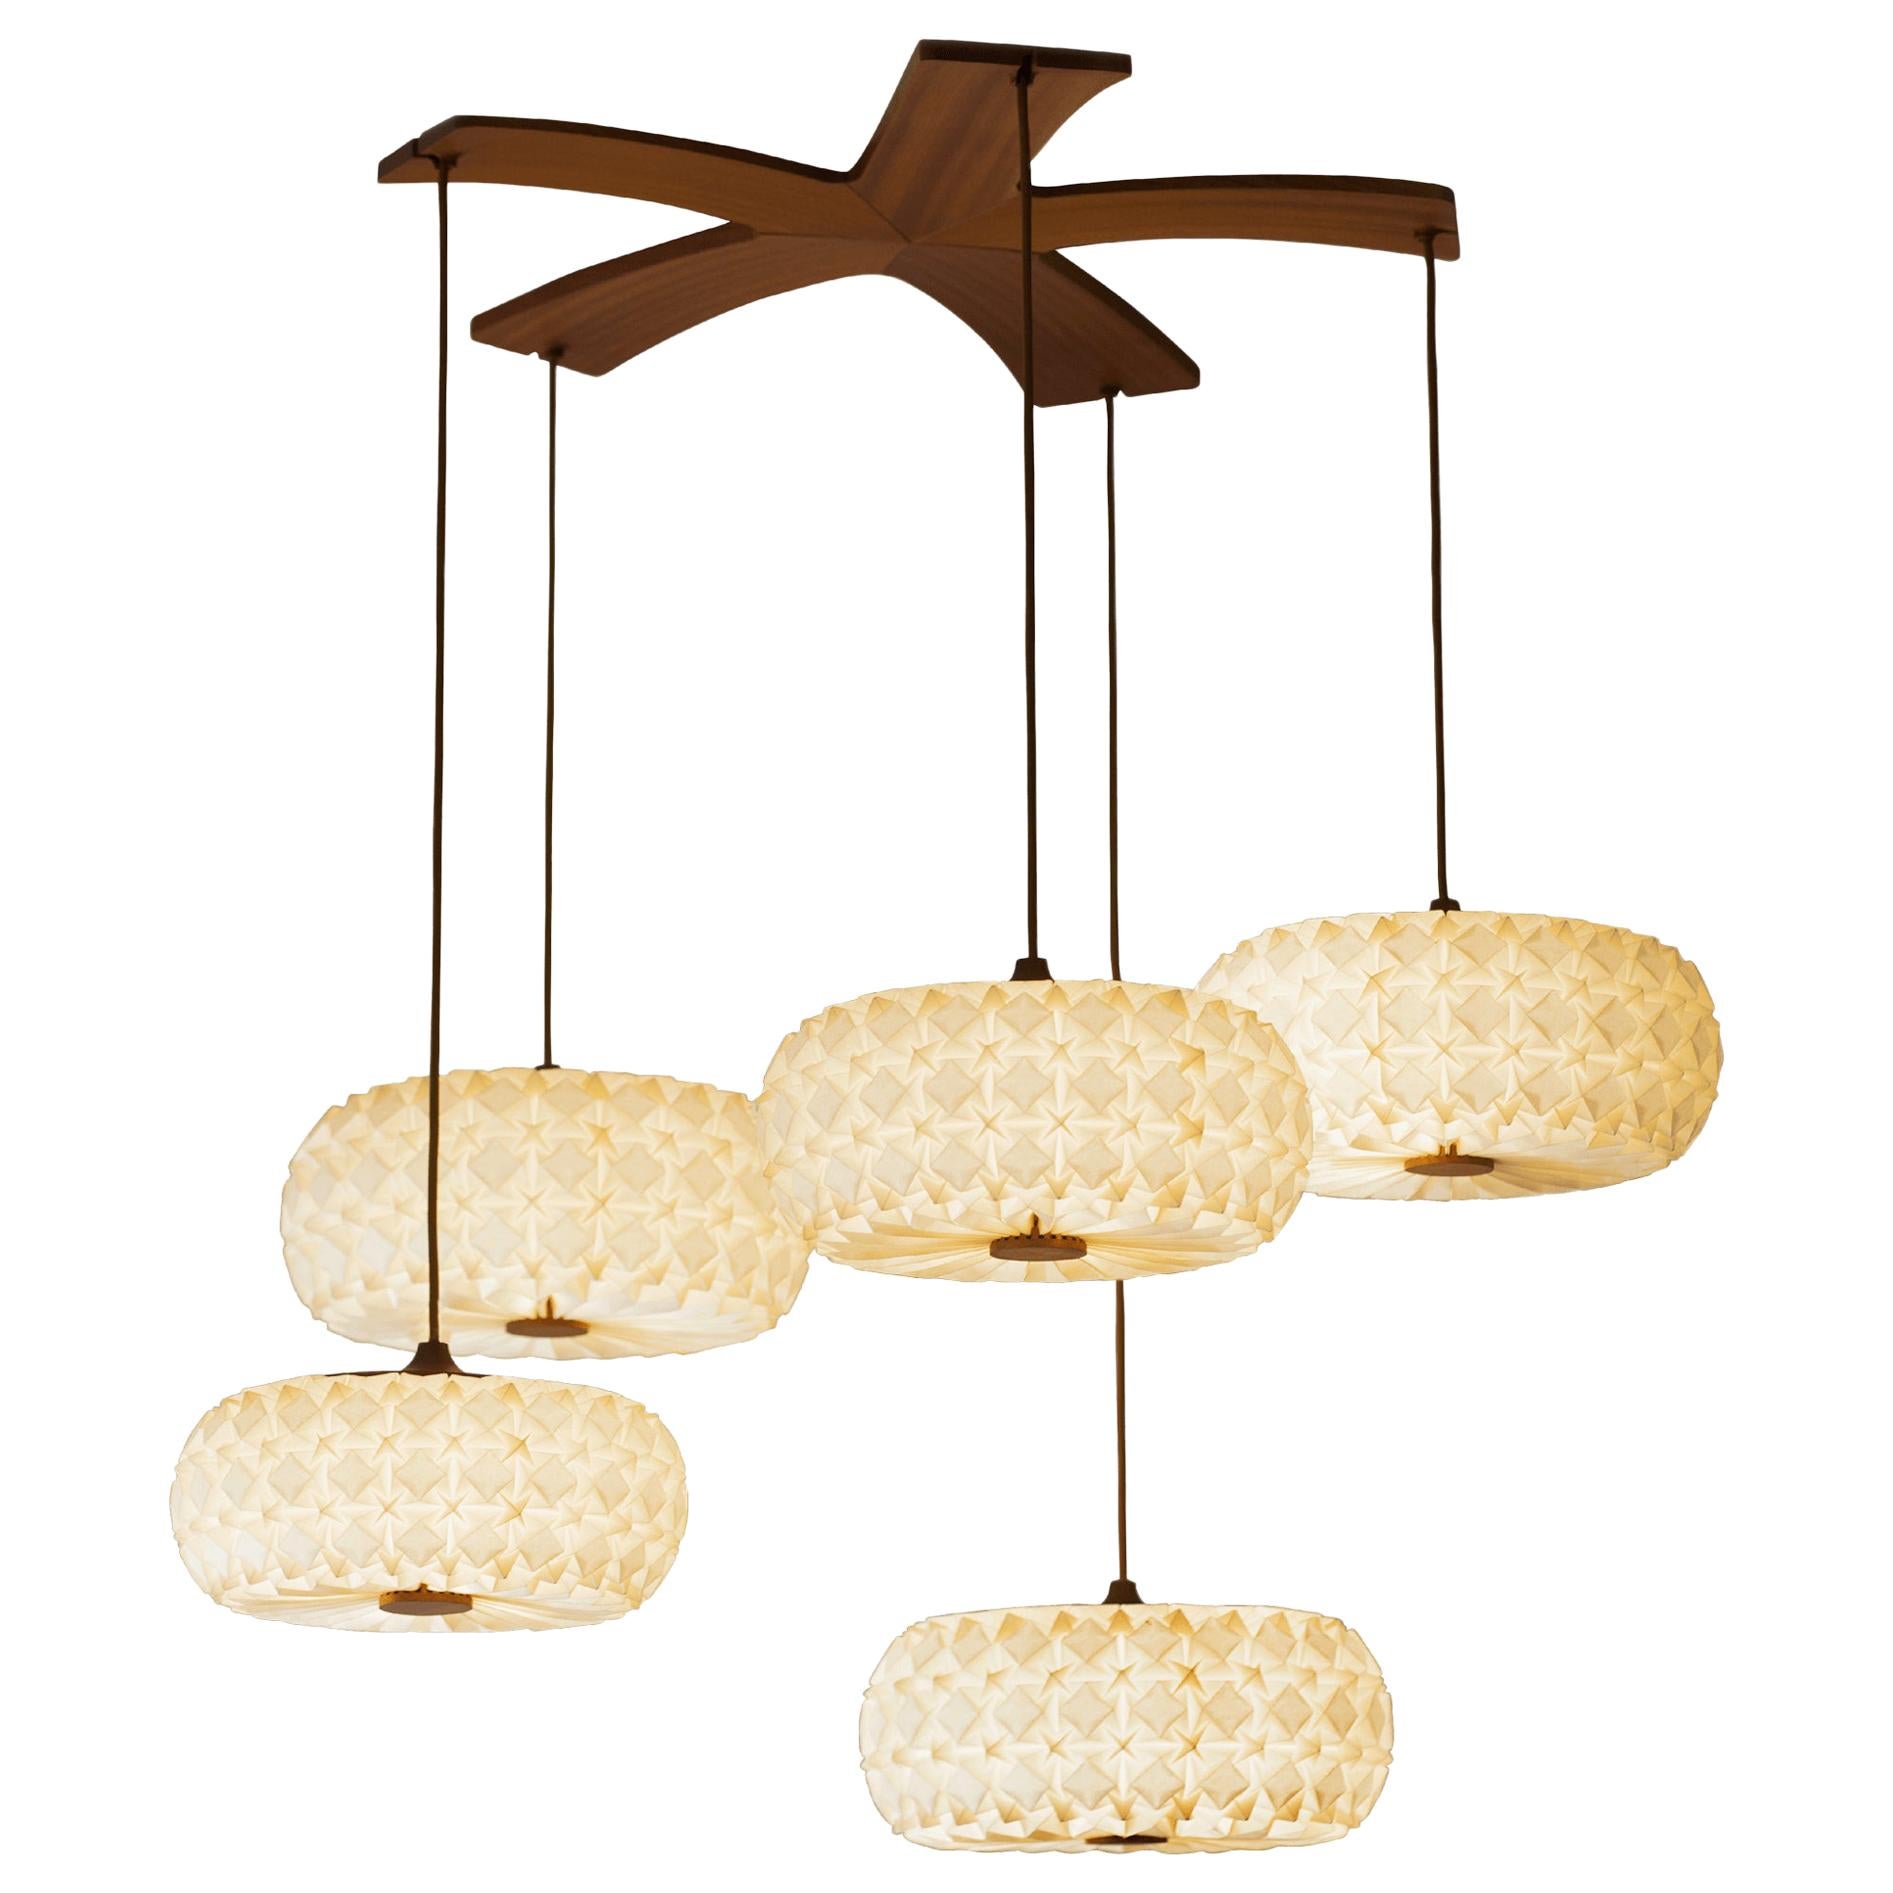 Origami Paper and Mahogany "5 Molecules" Chandelier by Aqua Creations For Sale